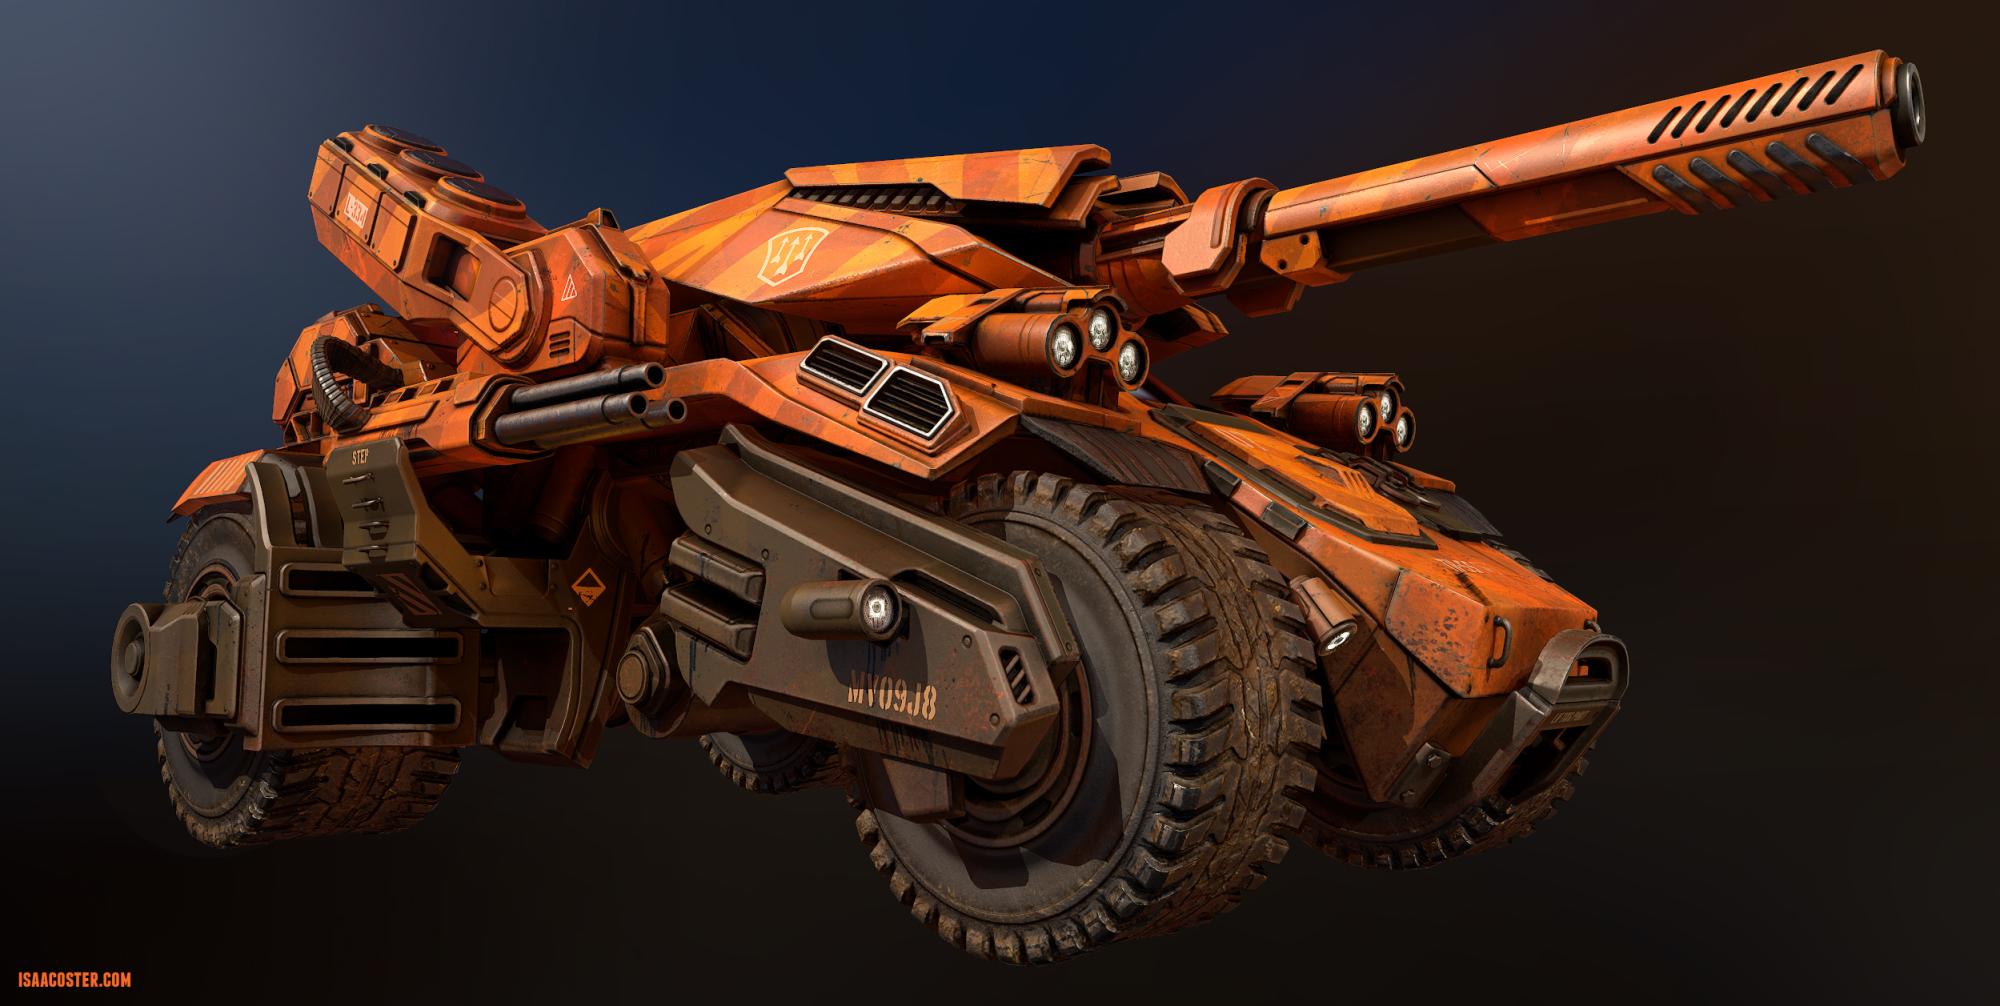 Full image of high poly 3D model Tank created by AET professor Isaac Oster